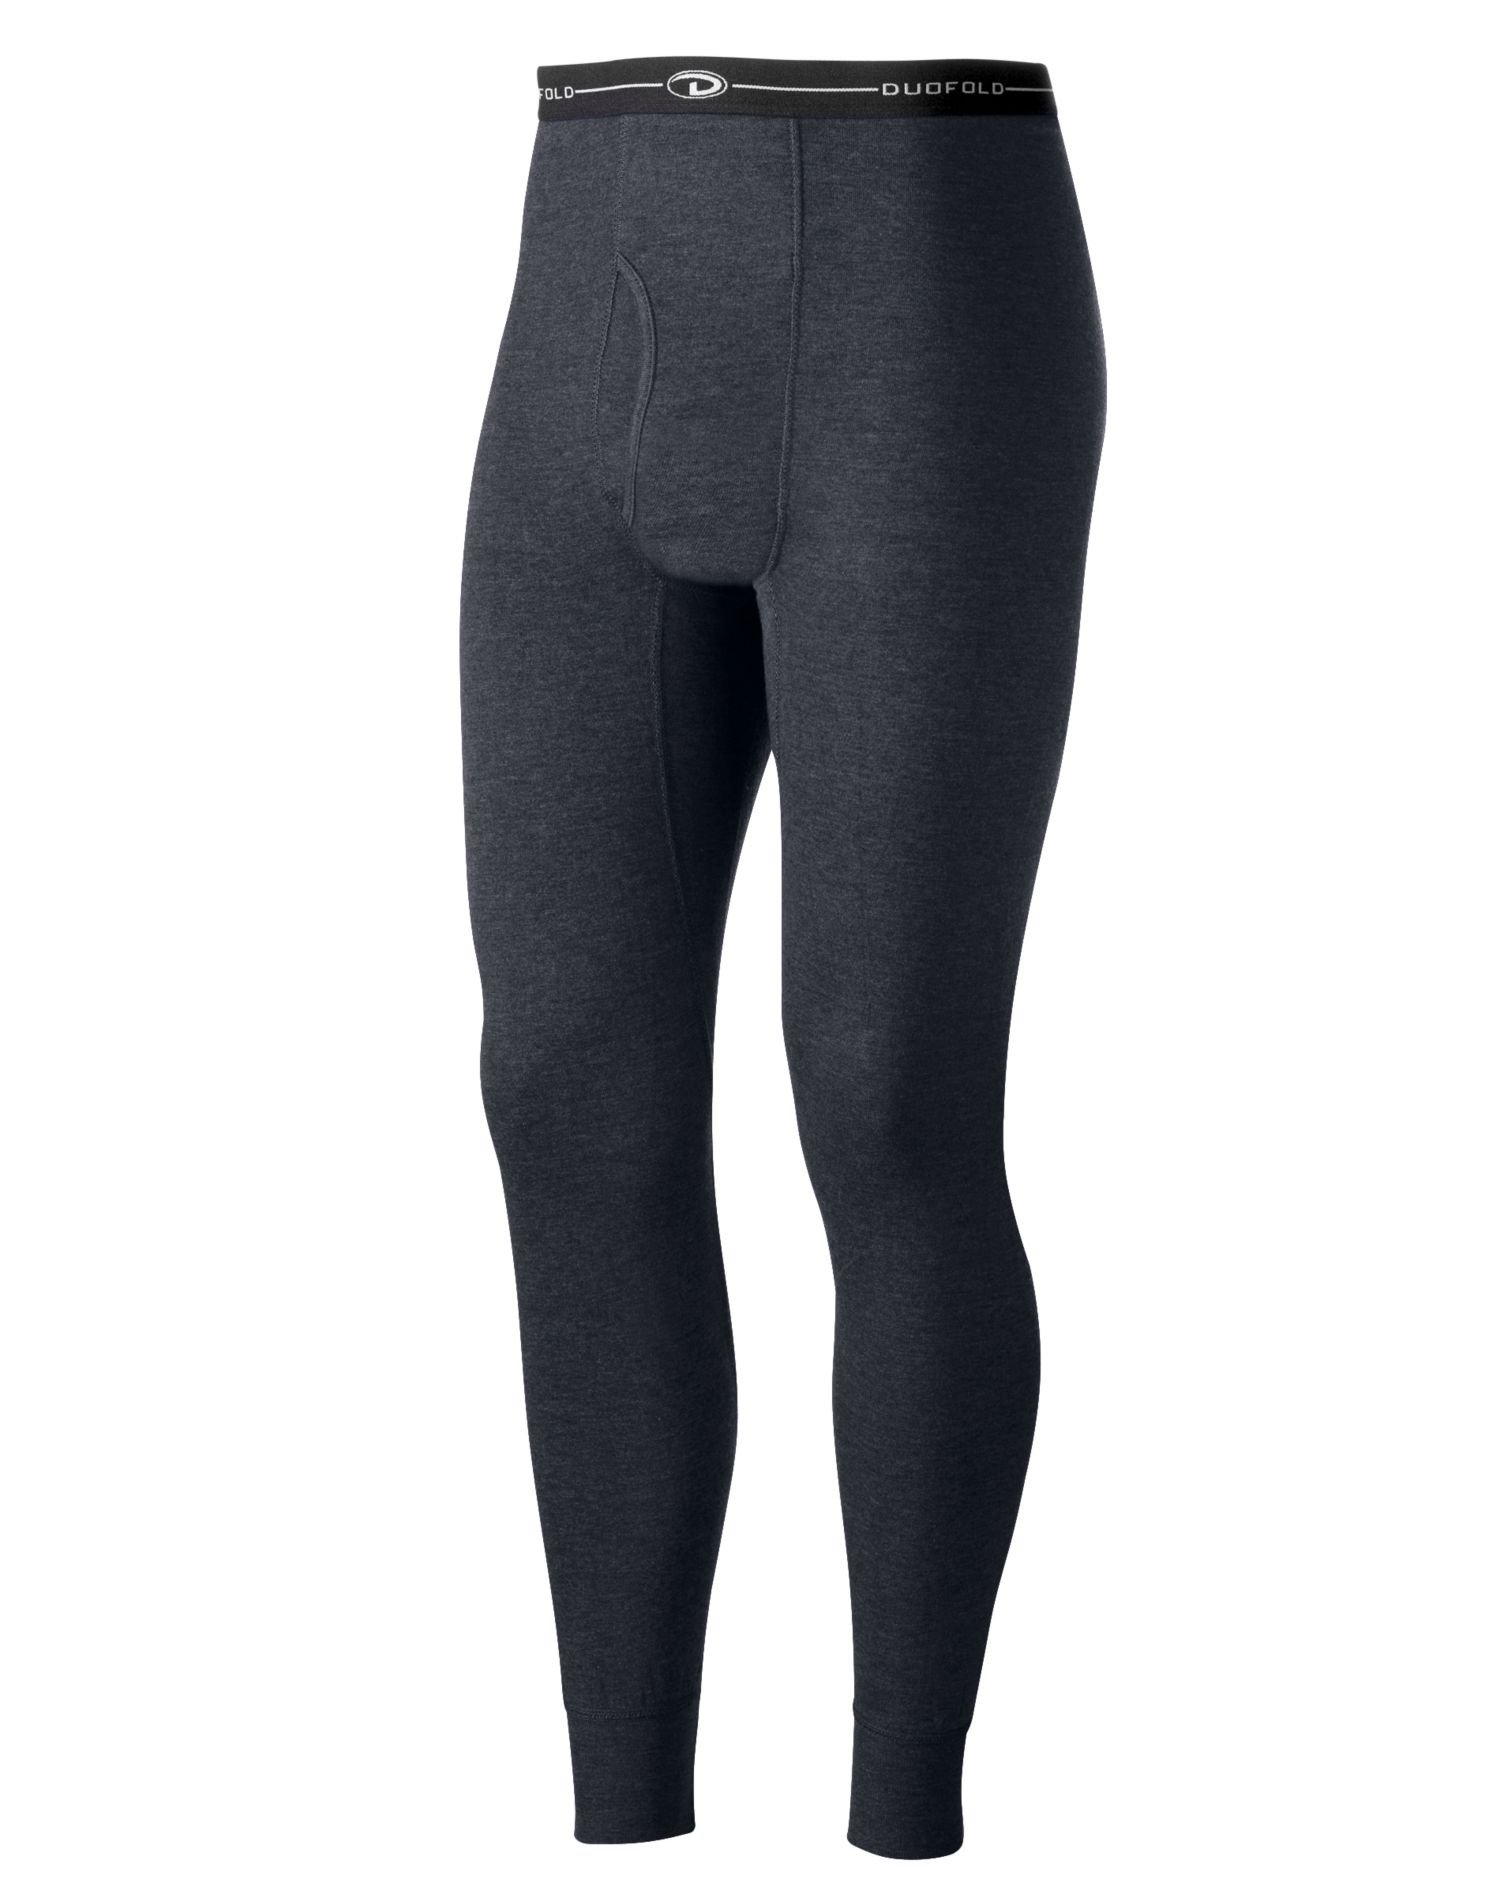 Duofold Men's Mid Weight Wicking Thermal Pant